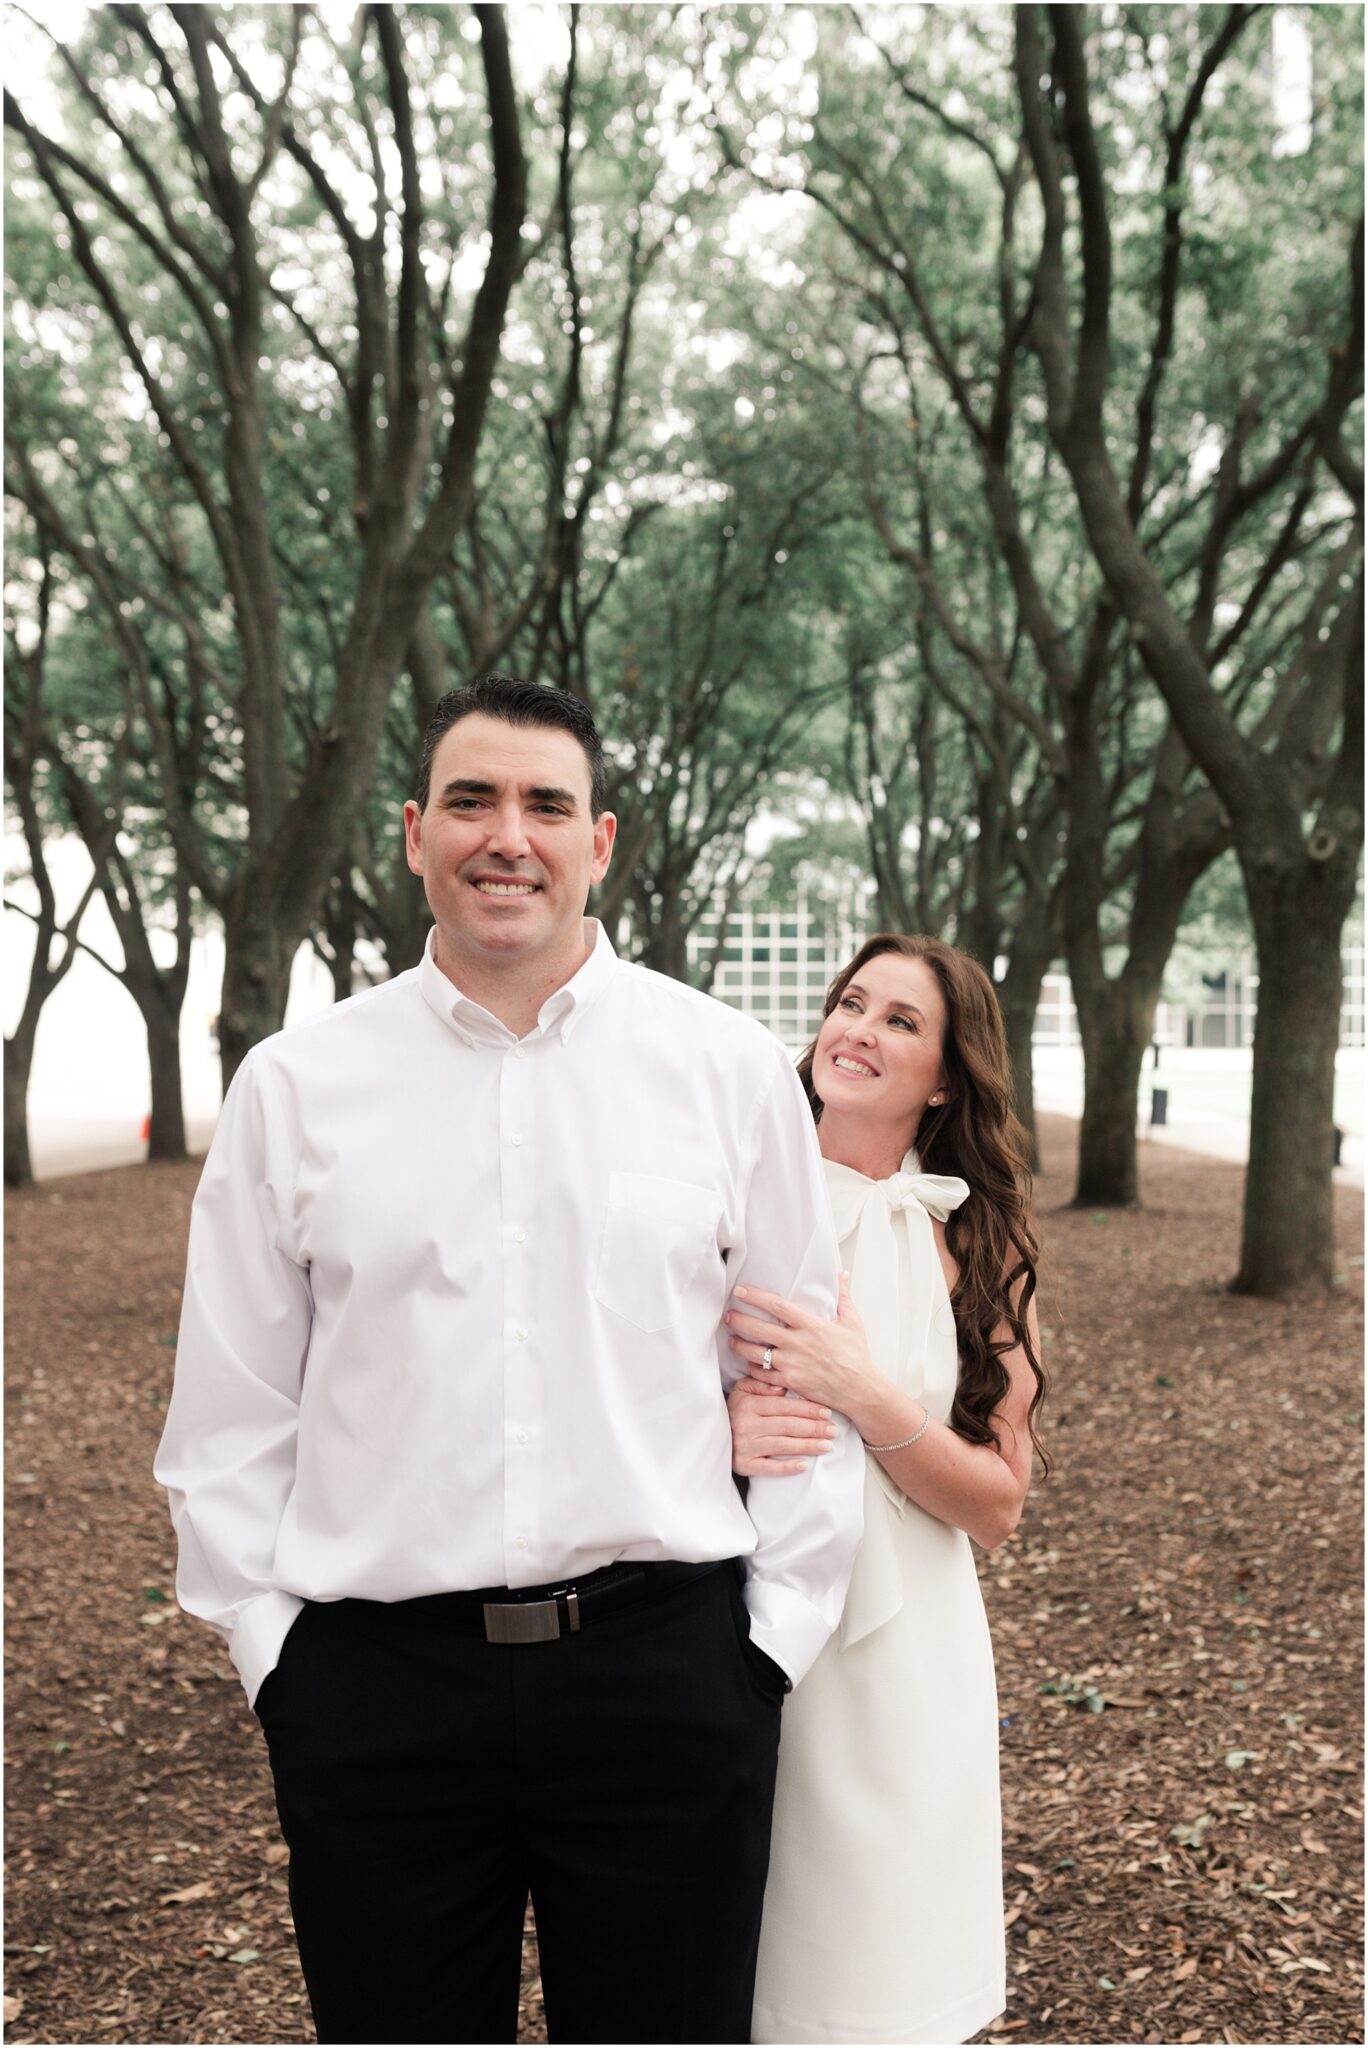 romantic engagement session at the water wall in Houston, Texas photographed by Swish and Click Photography